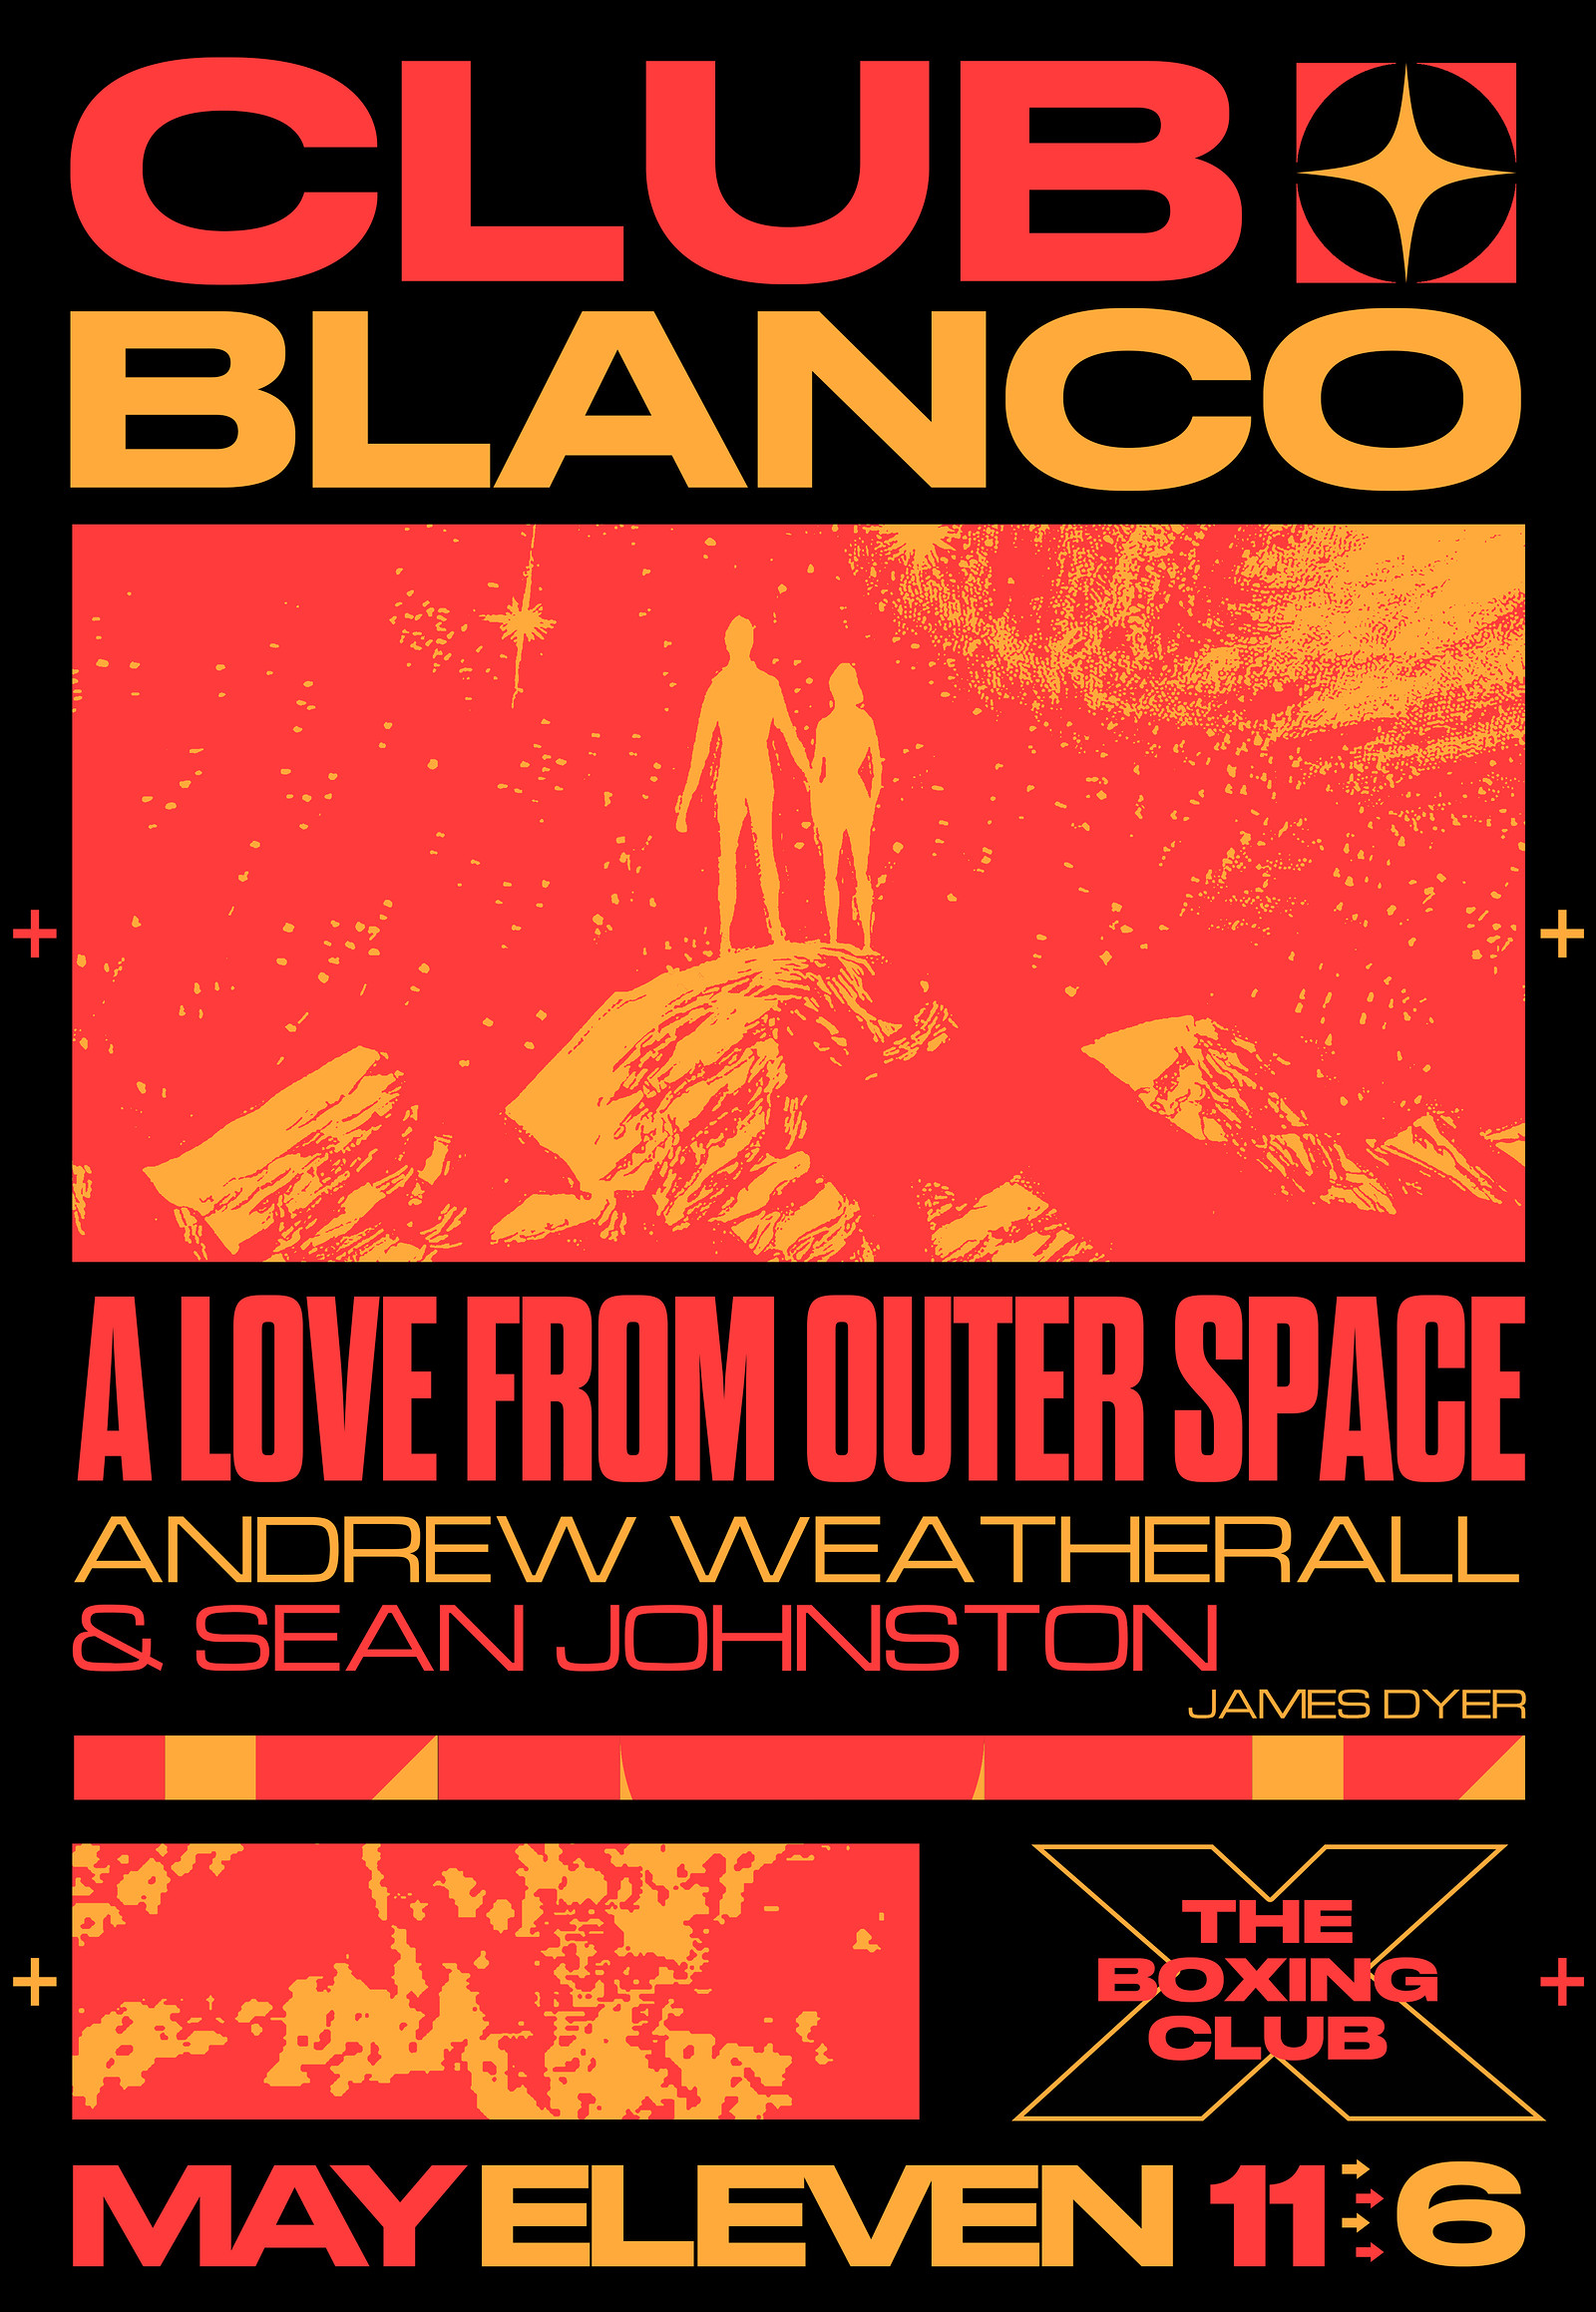 Club Blanco w/ A Love From Outer Space at The Boxing Club